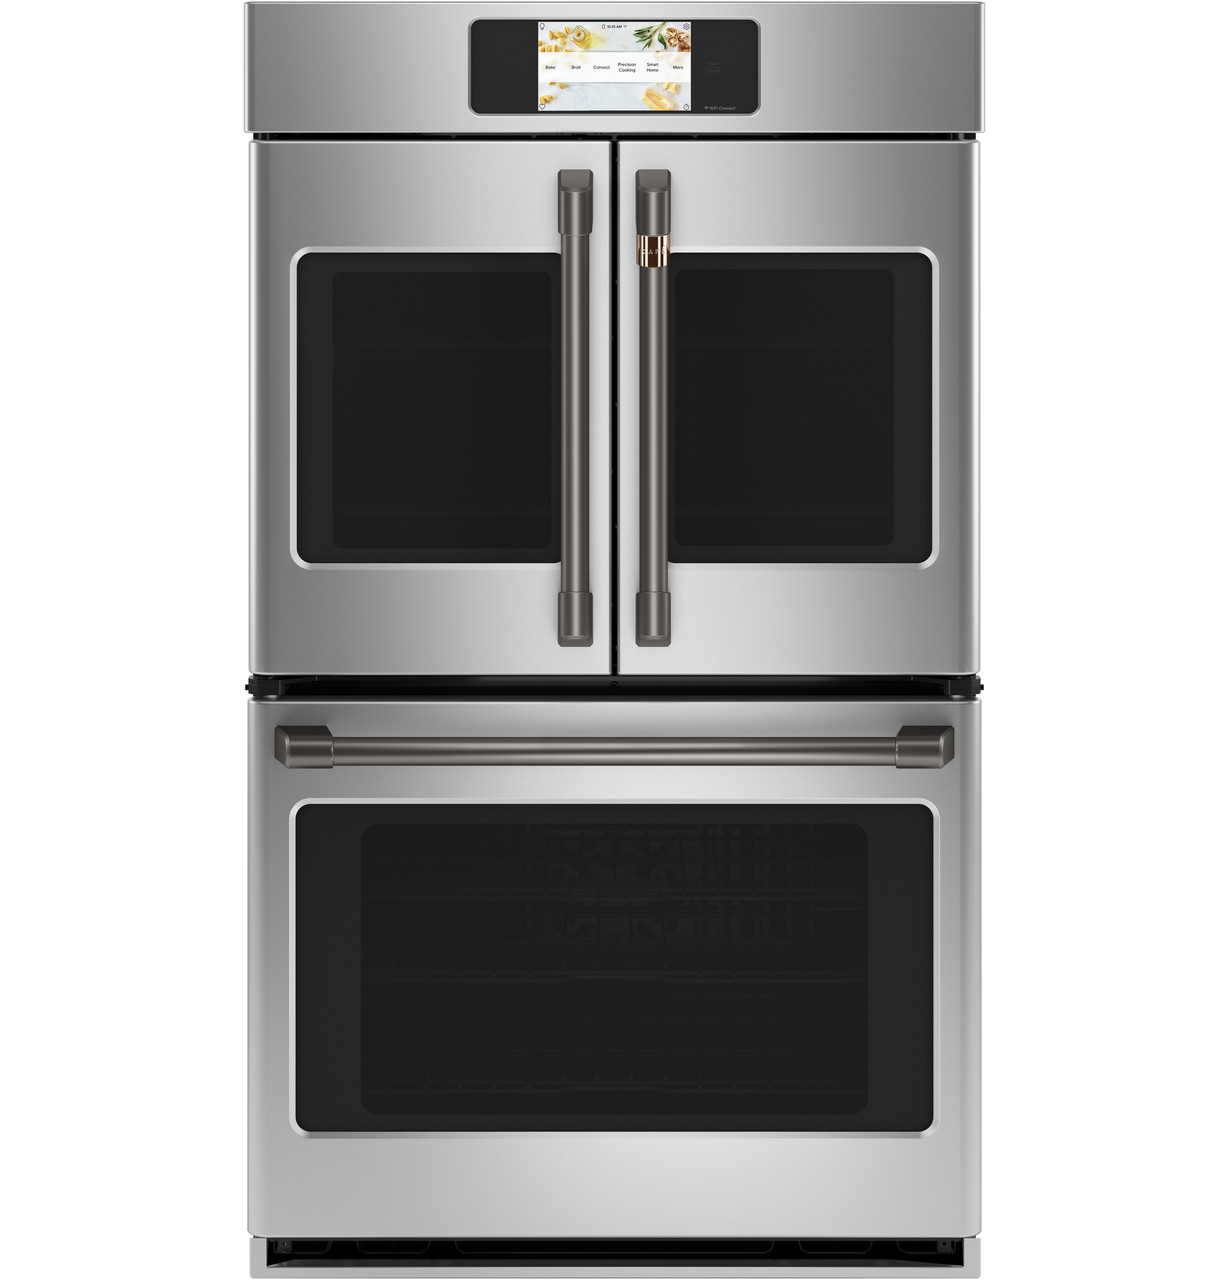 Café™ Professional Series 30 Smart Built-In Convection French